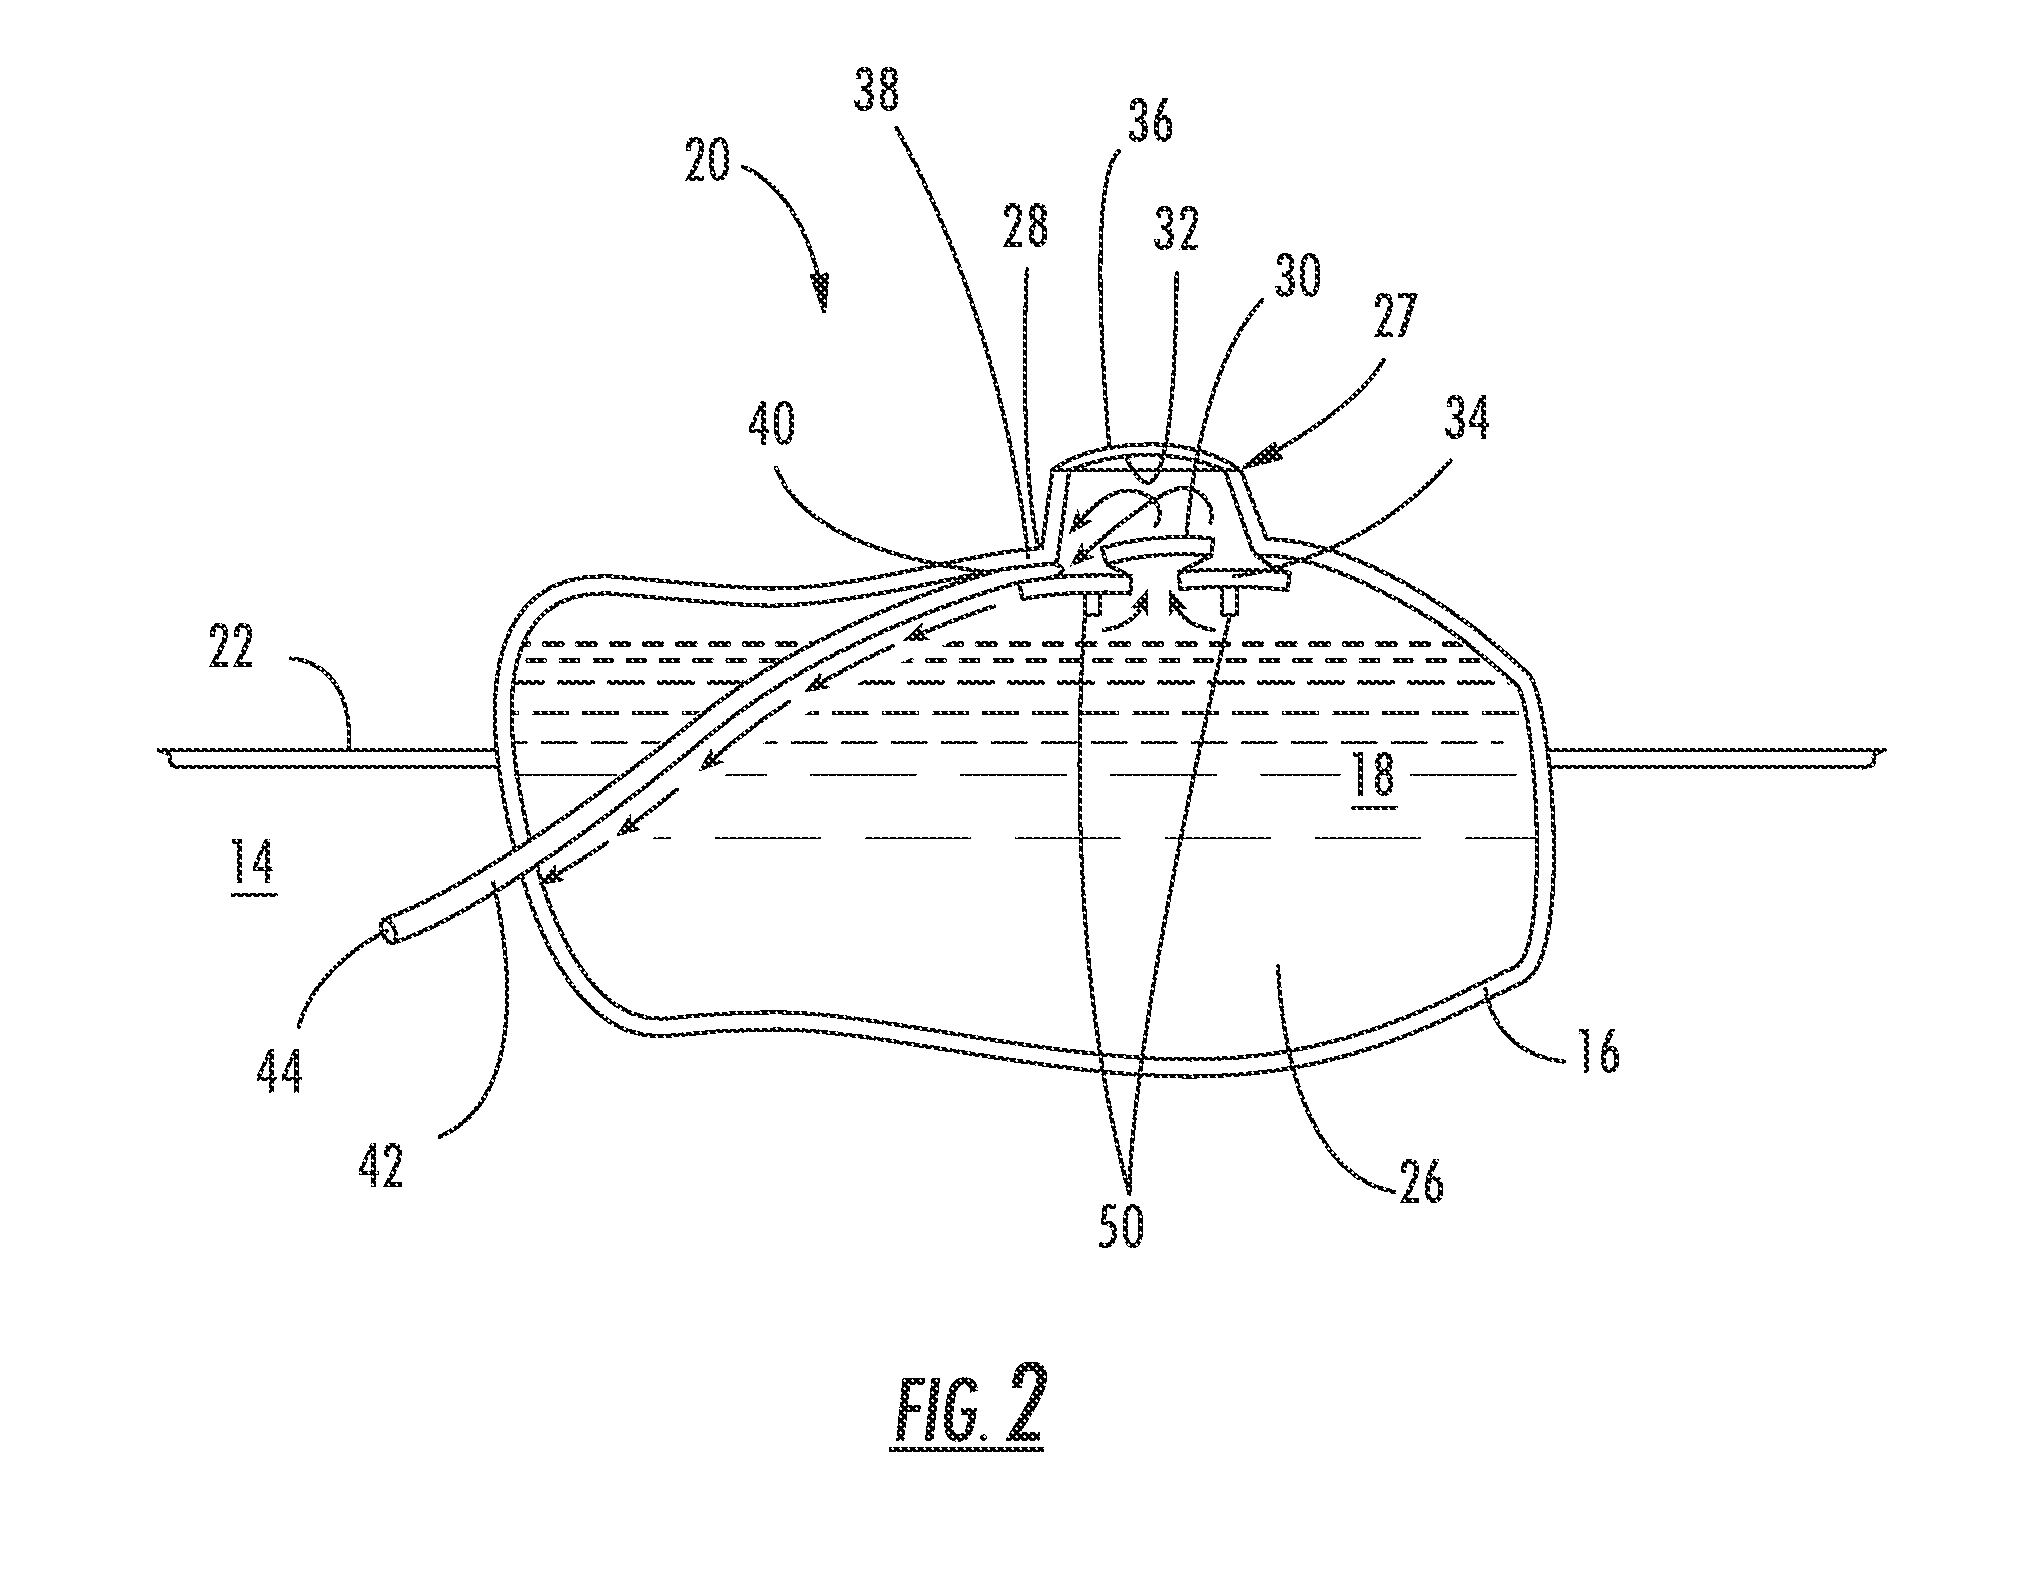 Container having a secondary reservoir for metered dosing of additives